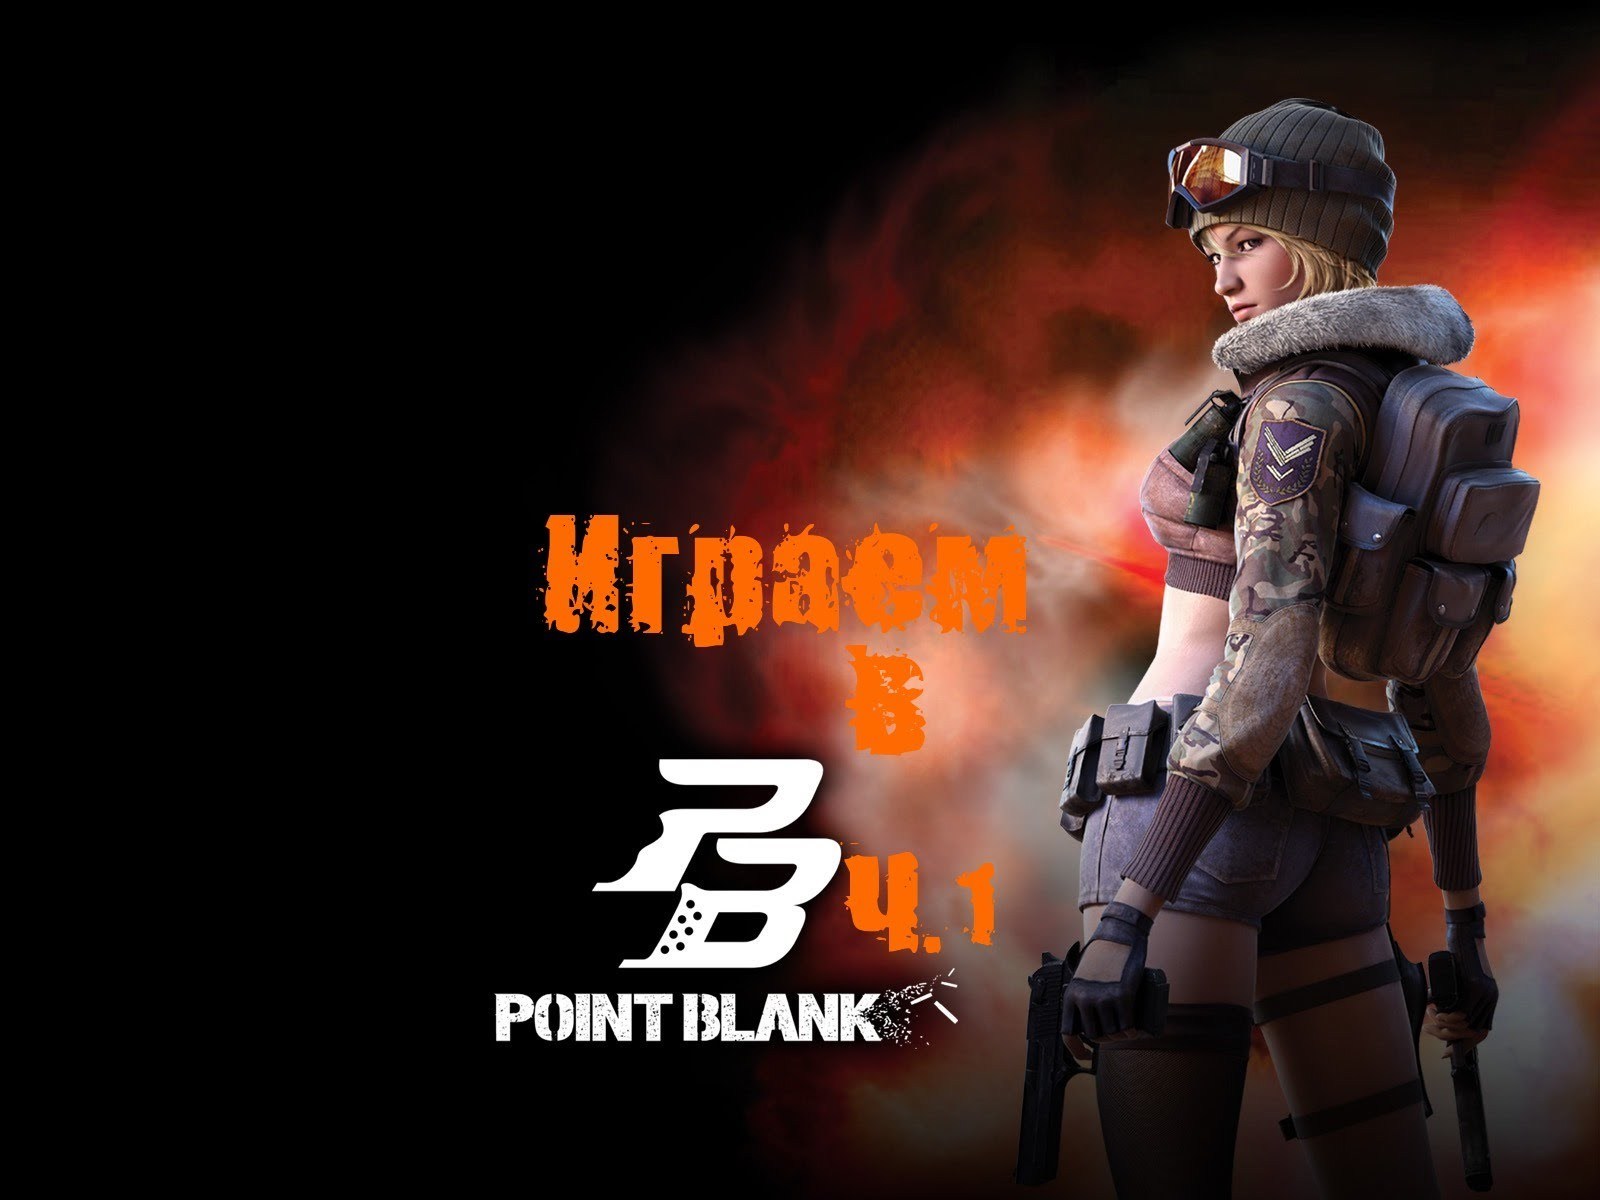 Download Latest HD Wallpapers of , Games, Point Blank